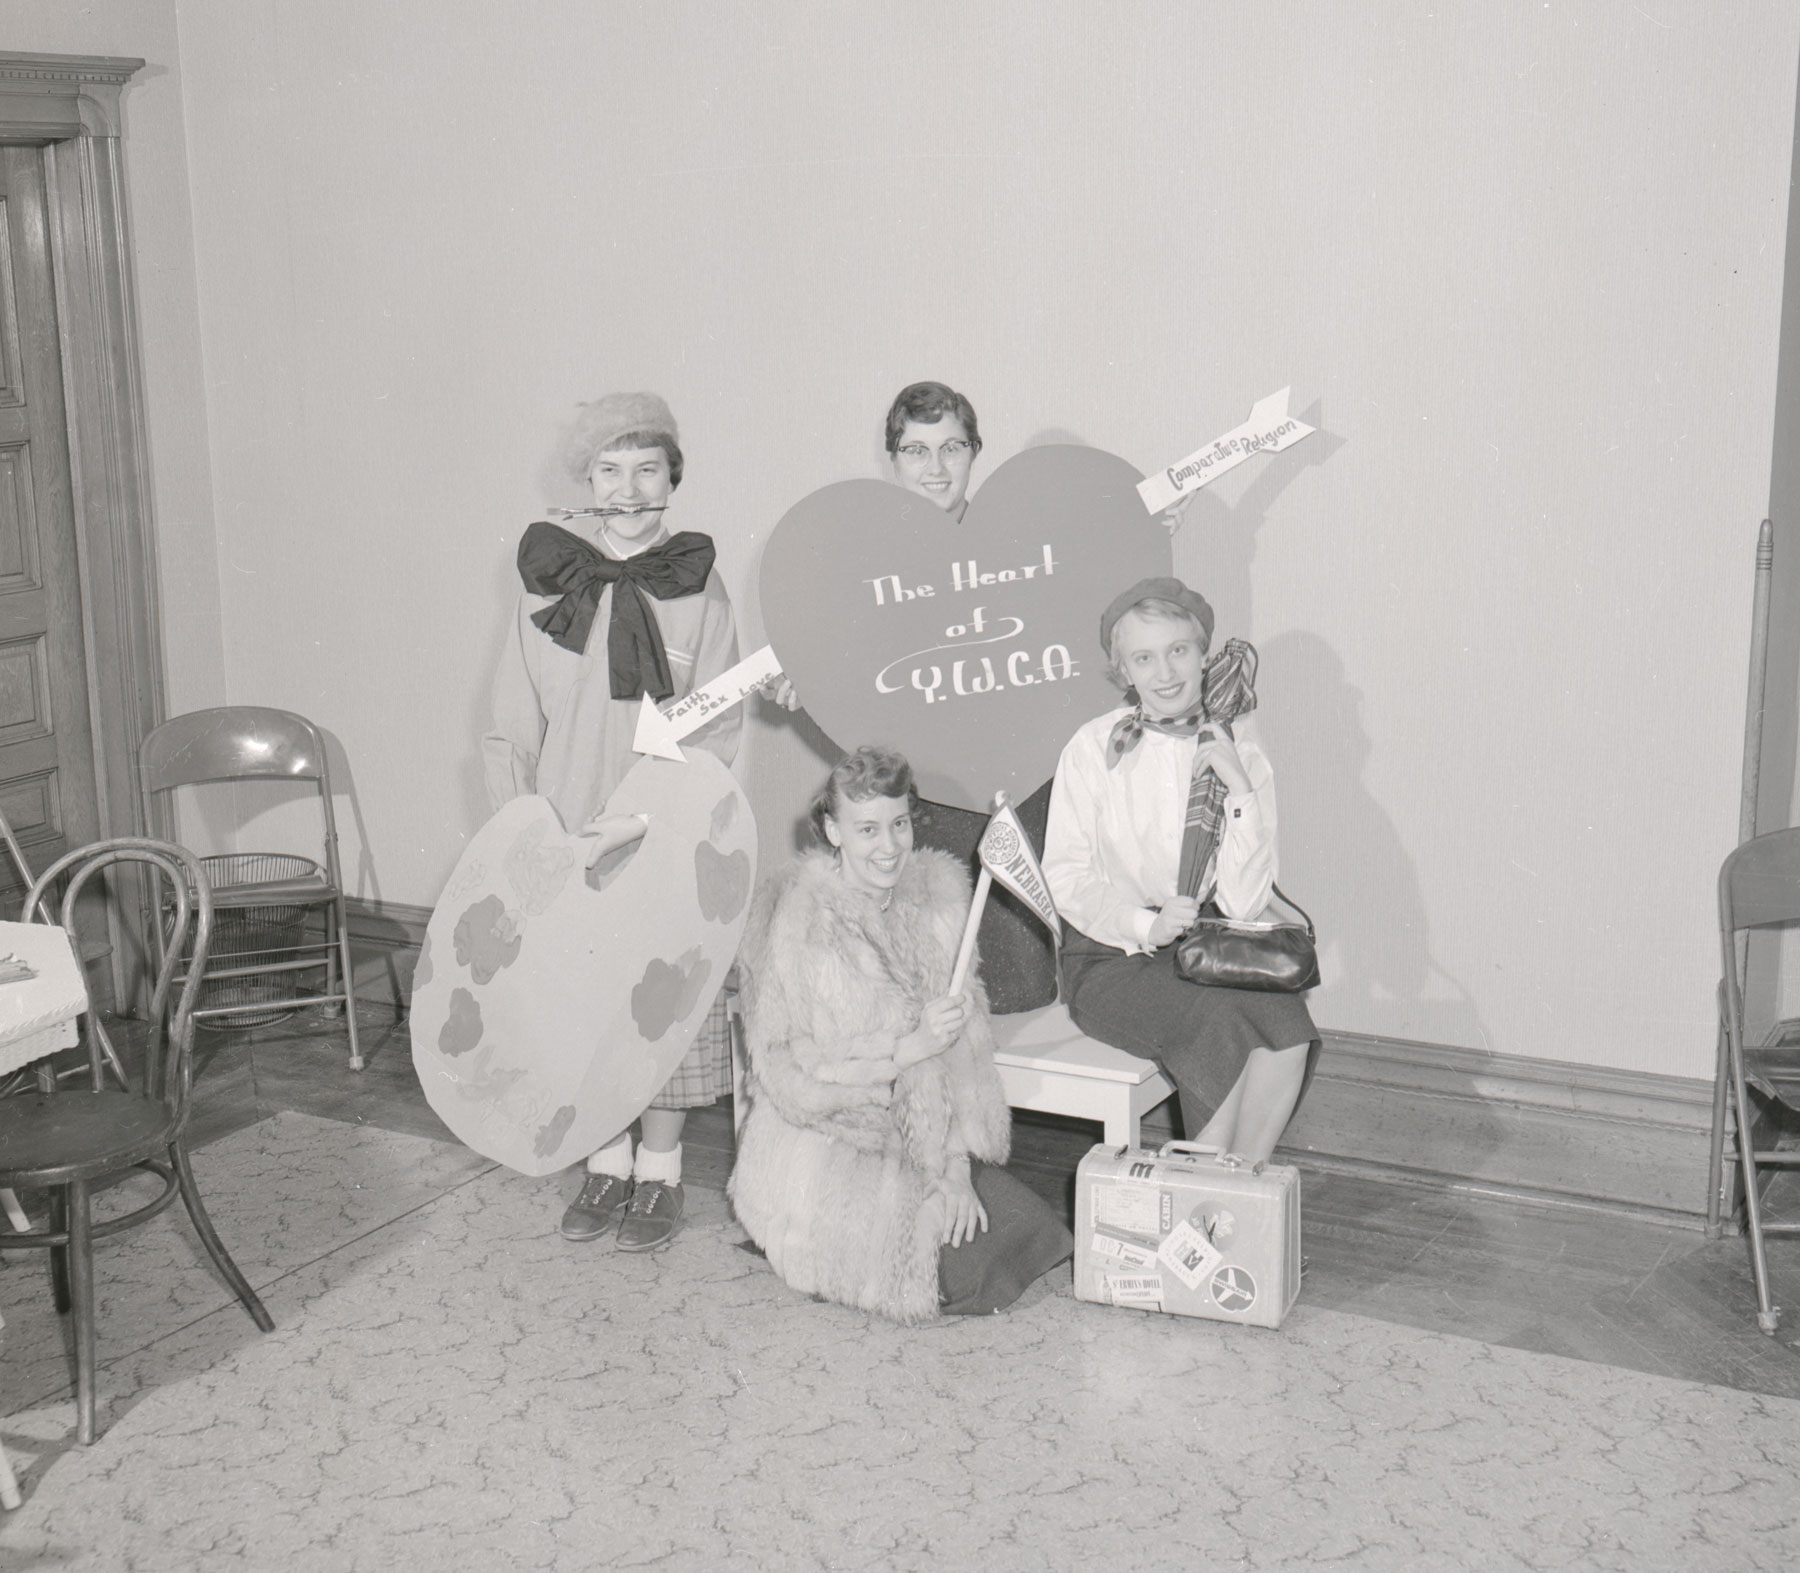 A black and white image of young women in Halloween costumes